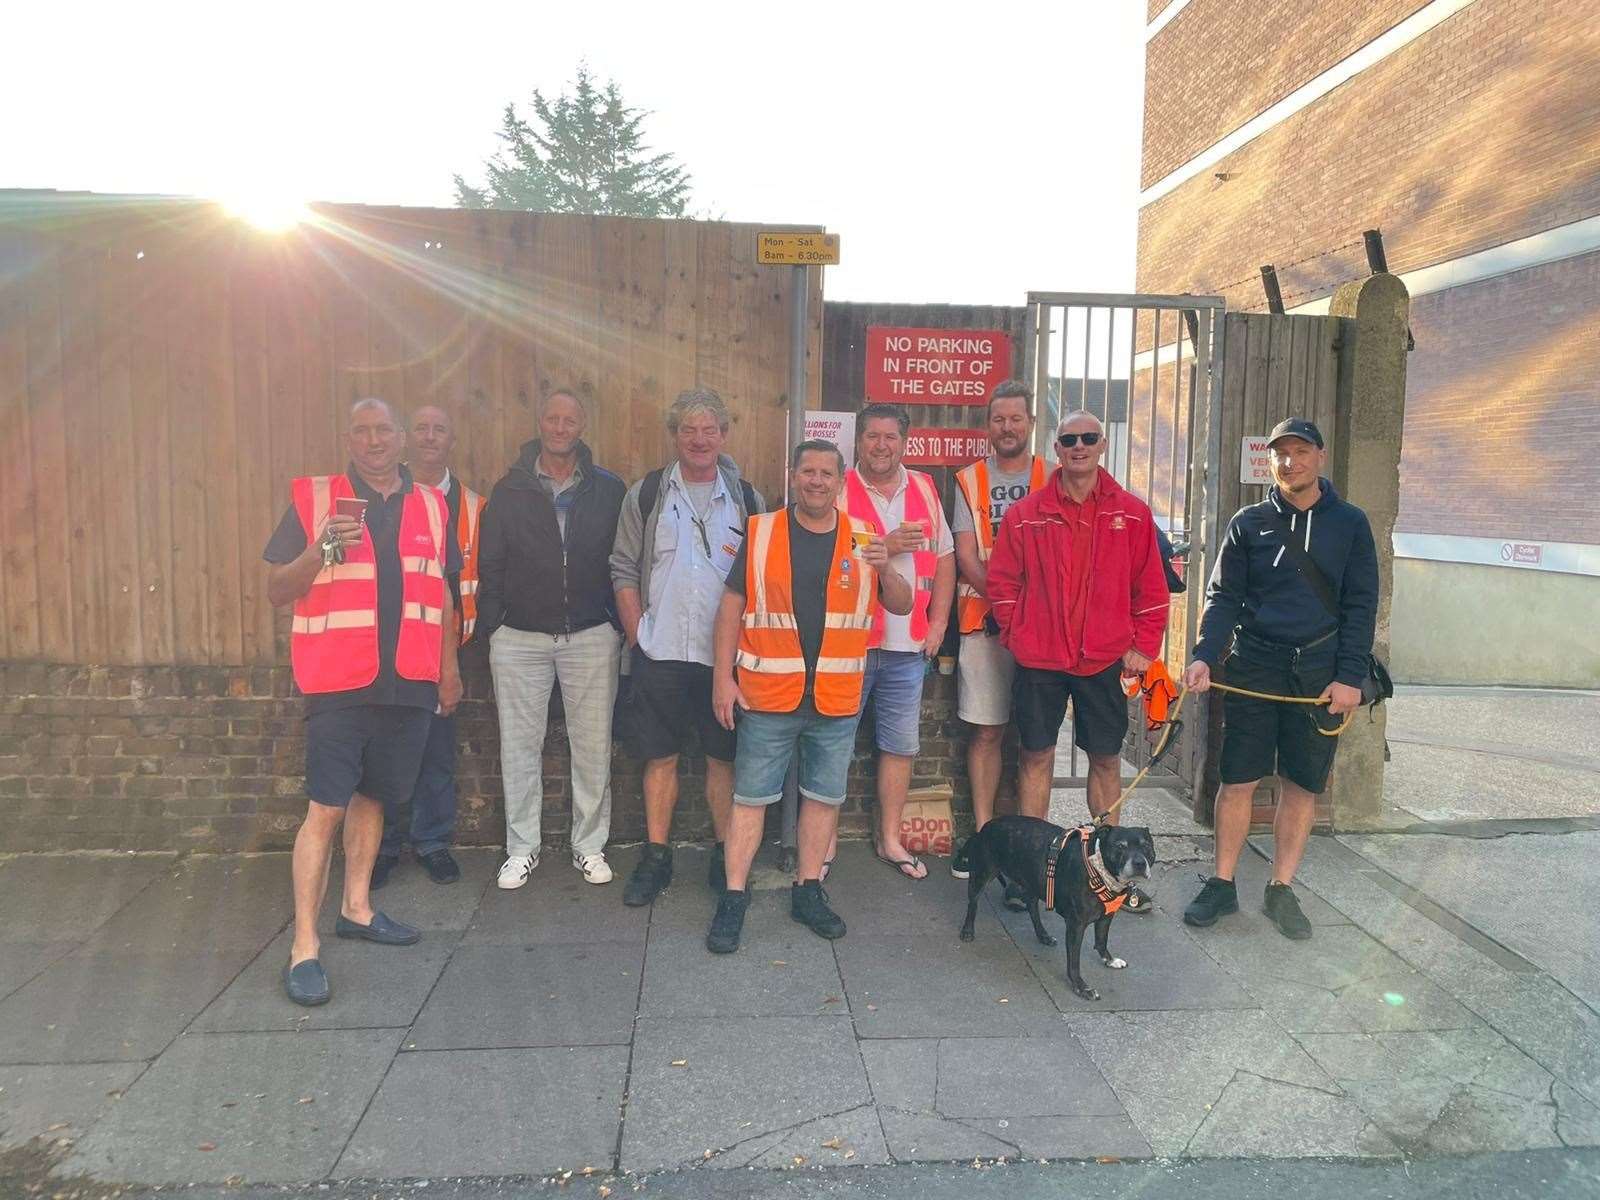 Postal workers in Gravesend are vowing to fight hard for an improved deal. Photo: @CWUnews